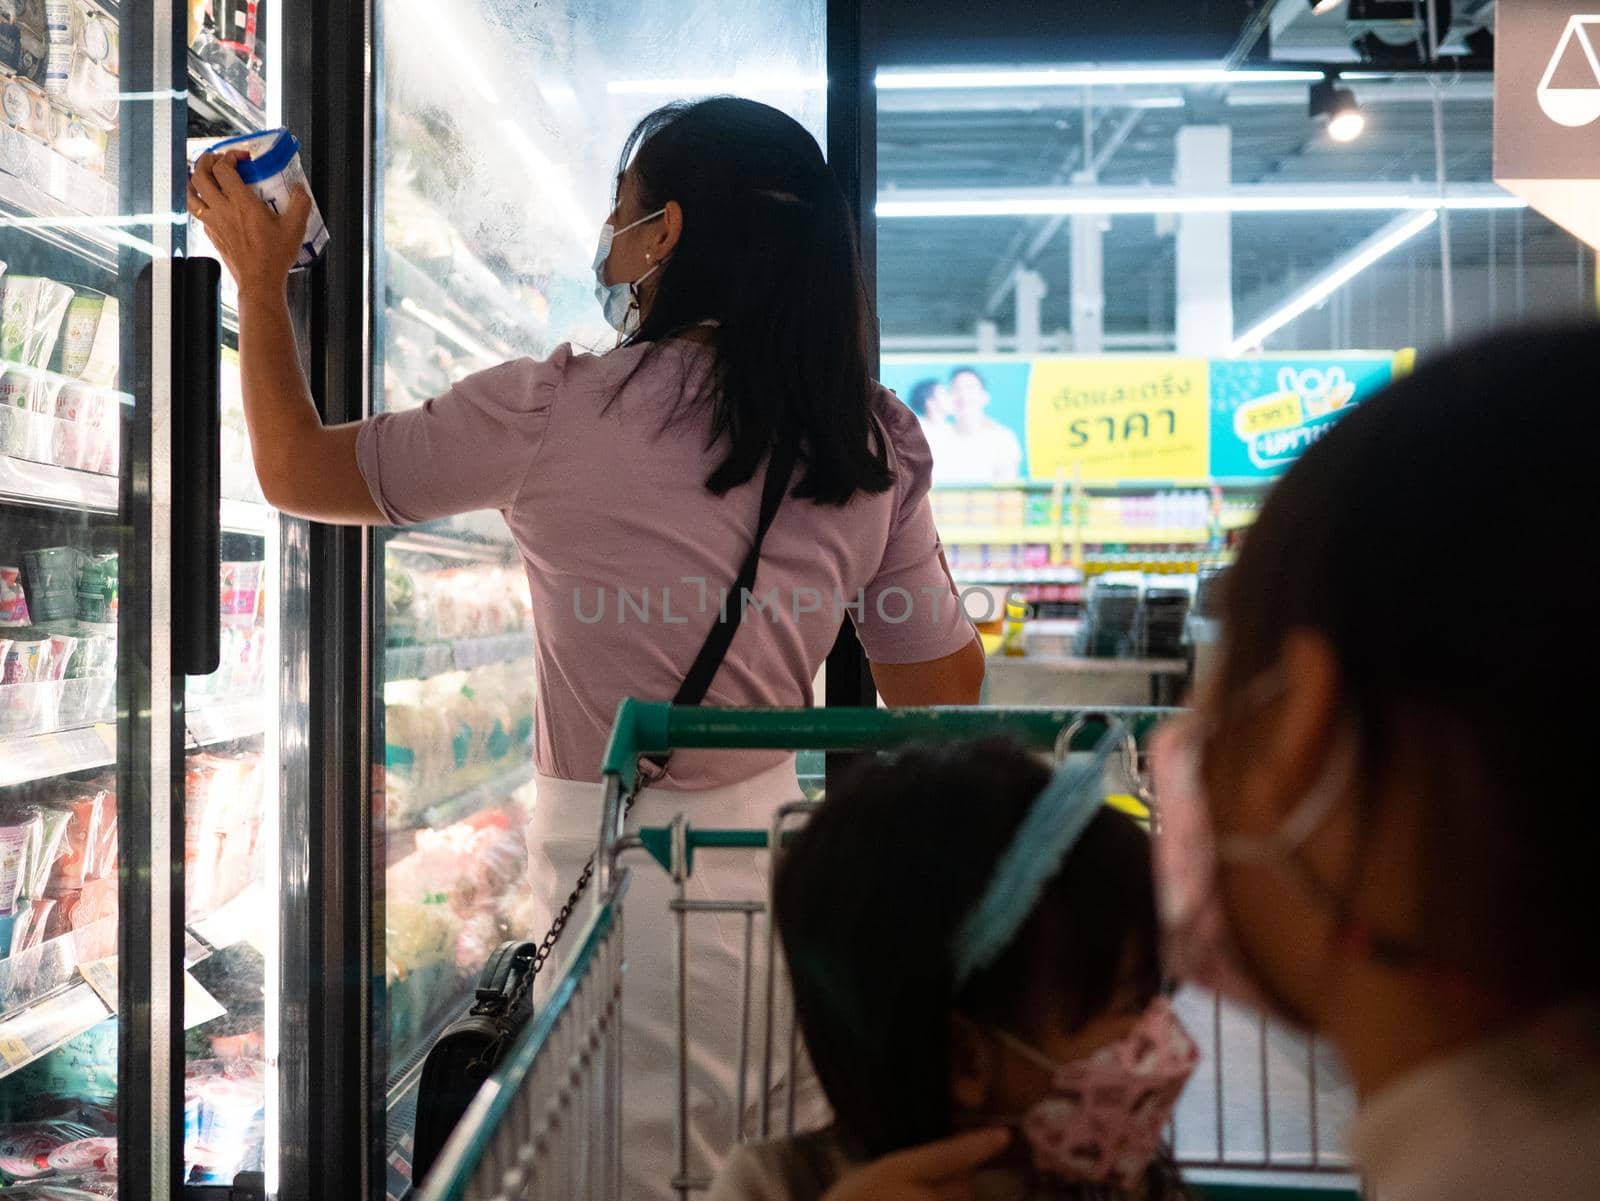 10 July 2021; Mother is choosing fresh dairy products or yogurt in the refrigerator  with her two young daughters sitting in a shopping cart in a supermarket in Chiang Mai. Shopping for healthy.